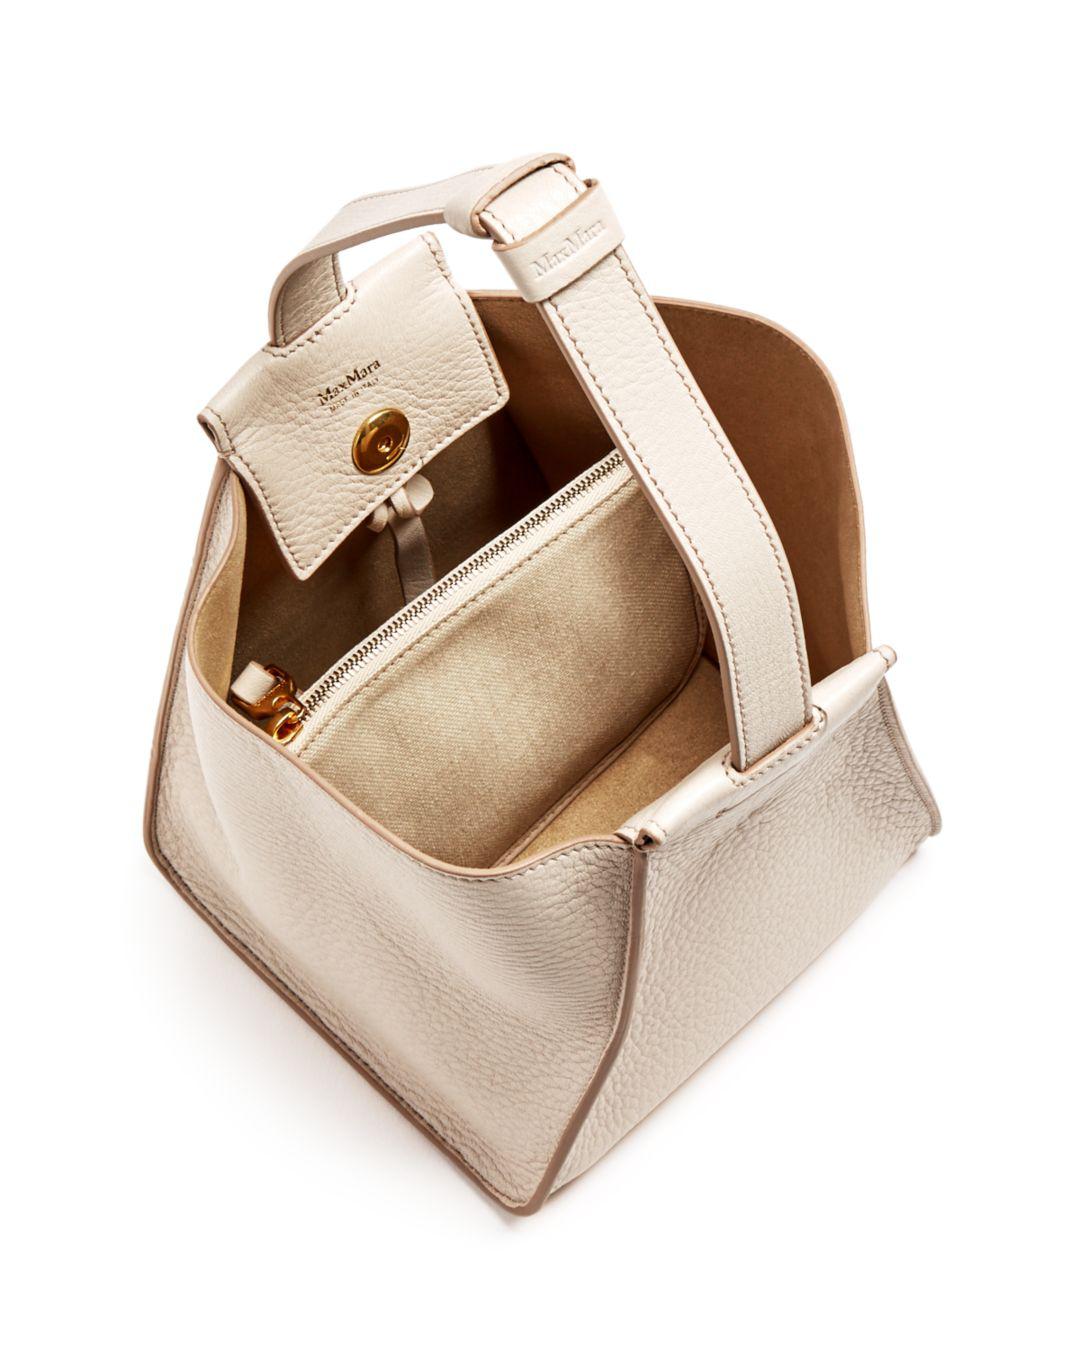 Max Mara Small Leather Bucket Bag in Ivory White/Gold (White) - Lyst